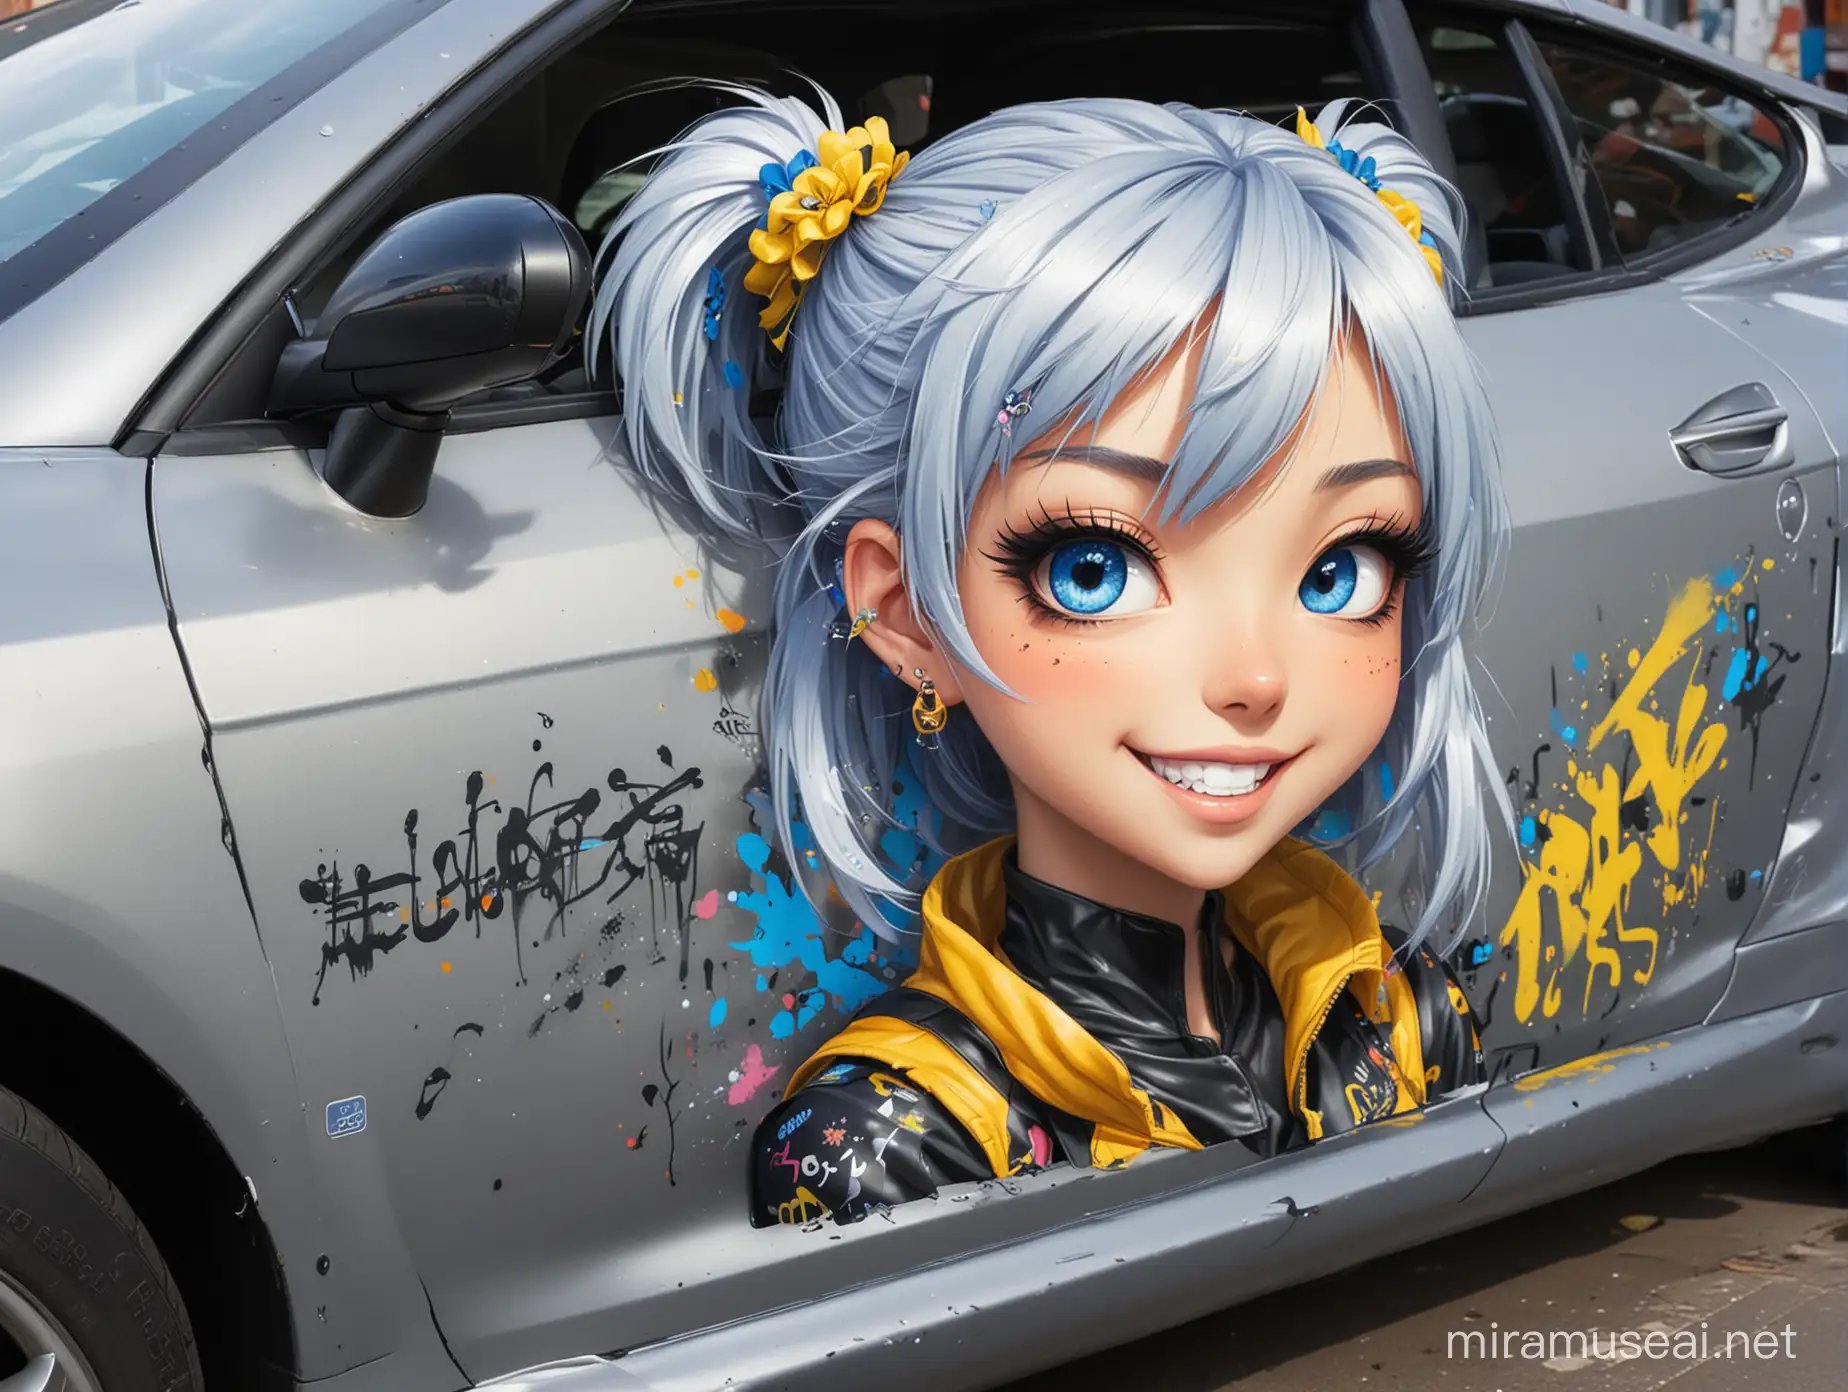 Close-up of an airbrushed design on a sports car, the design depicting a colorful cute anime girl, completely in anime style. She has silver hair, blue eyes, yellow skin, a wide smile, and poses grinning. Her black gothic outfit is tattered and decorated with graffiti of Japanese characters. There is an anime-style illustration painted on the side door. This is a complete, detailed and high quality photograph.